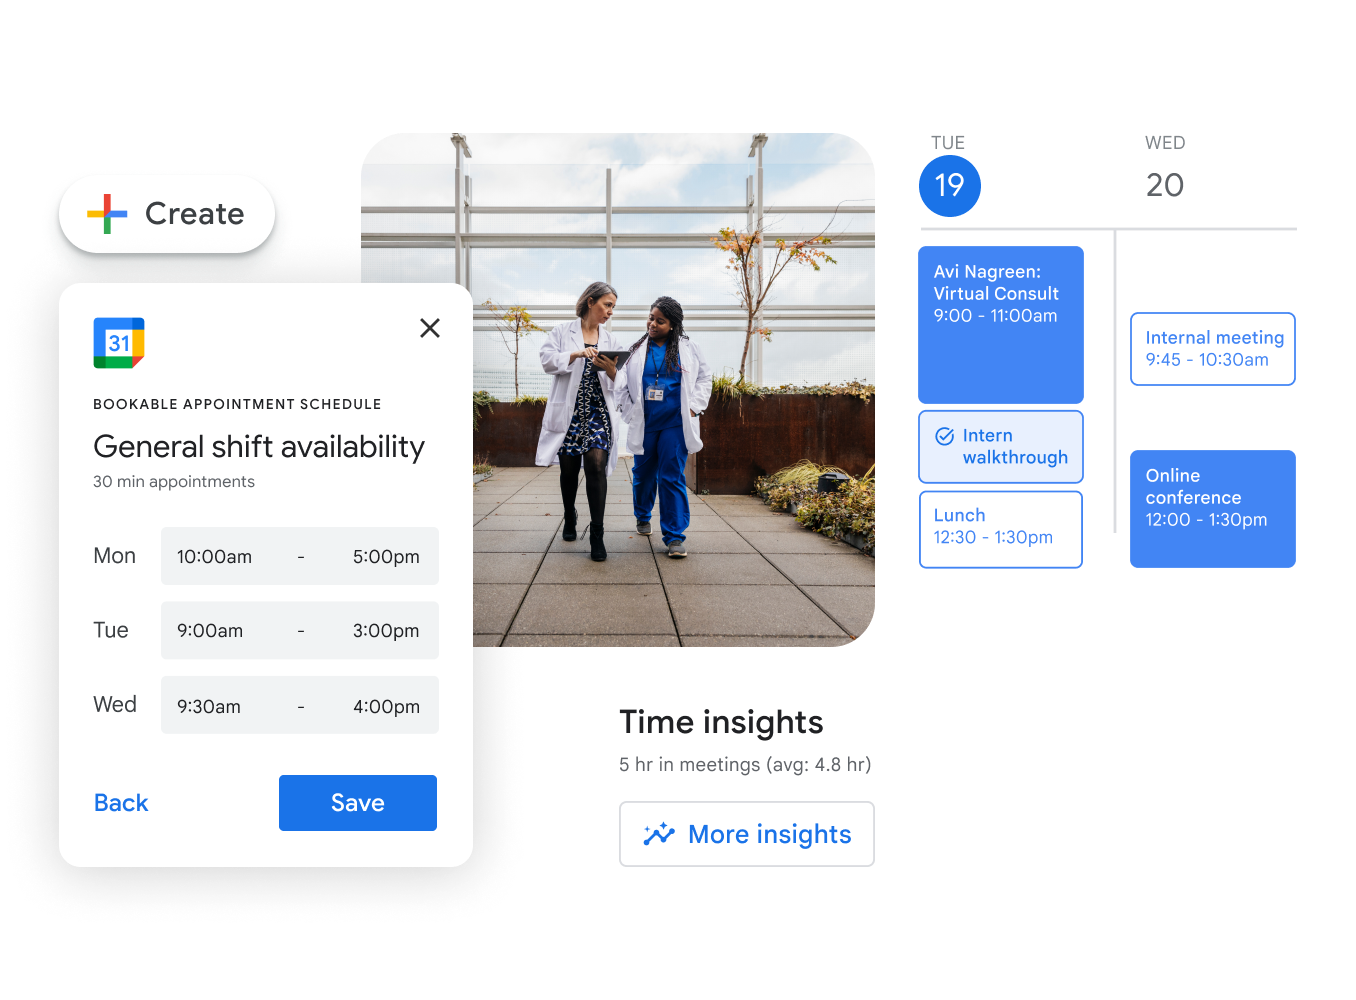 Google Calendar to create appointment scheduling and manage routine tasks.